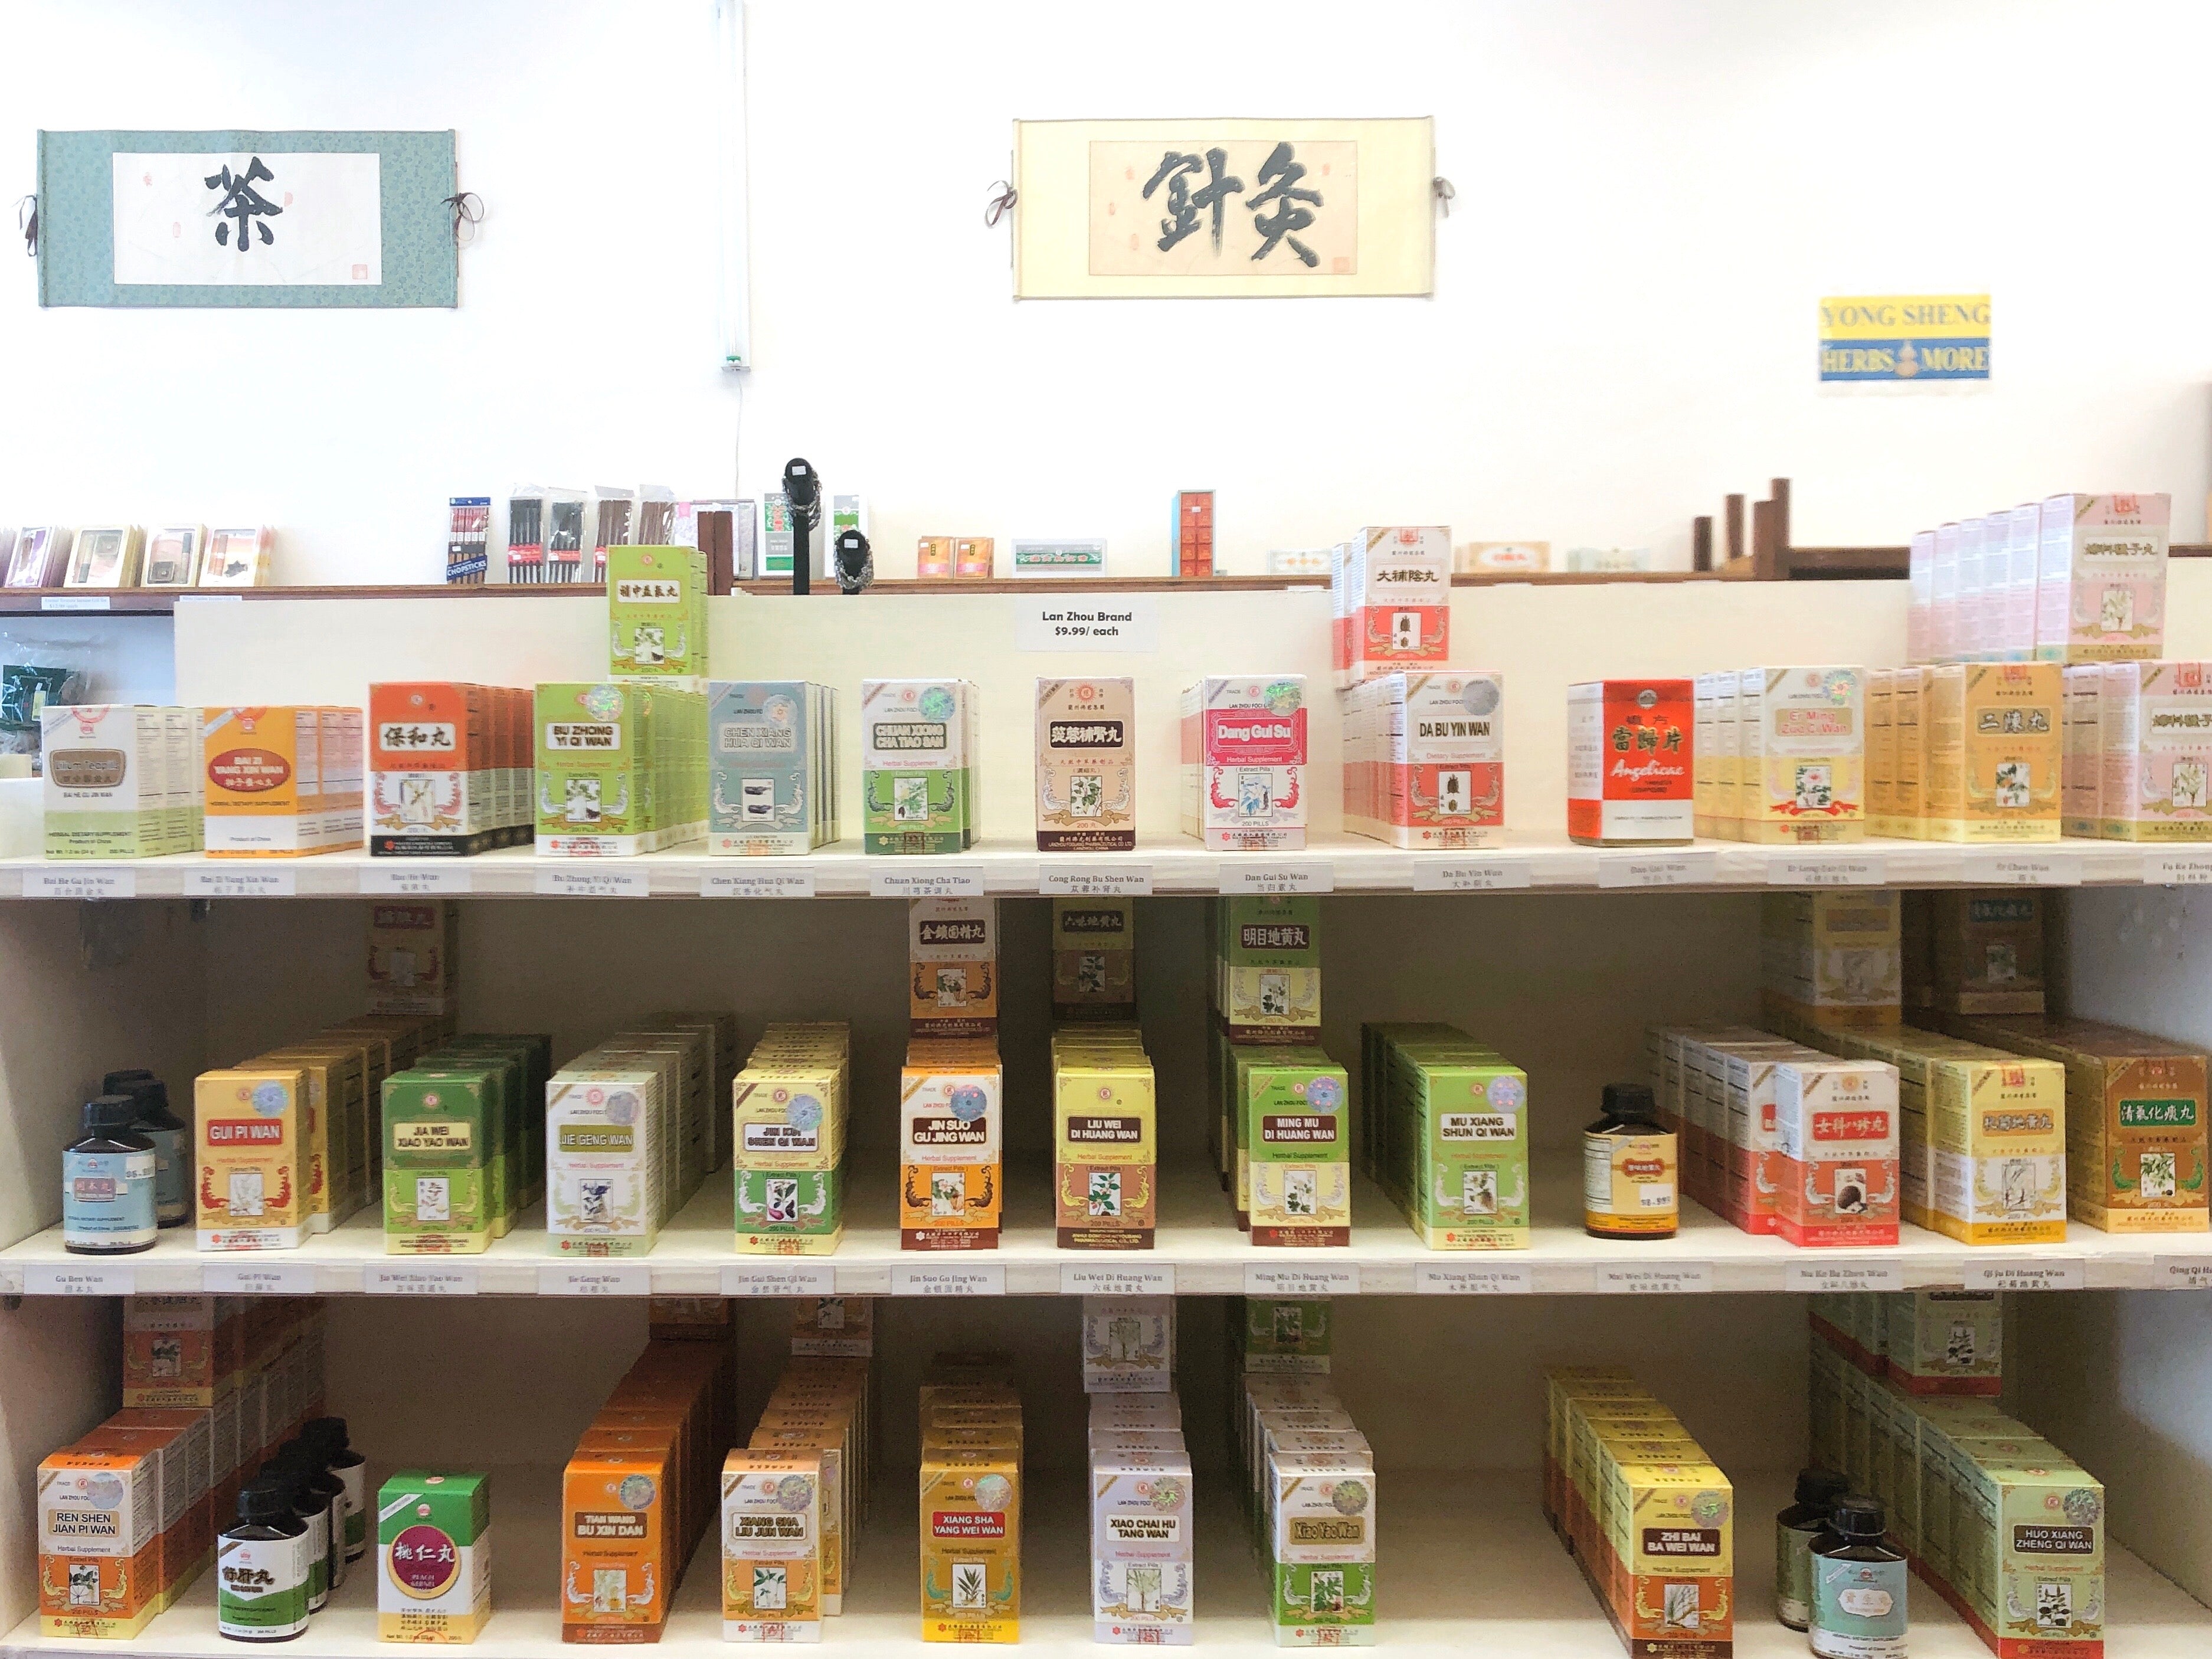 inside our store front yong sheng herbs and more